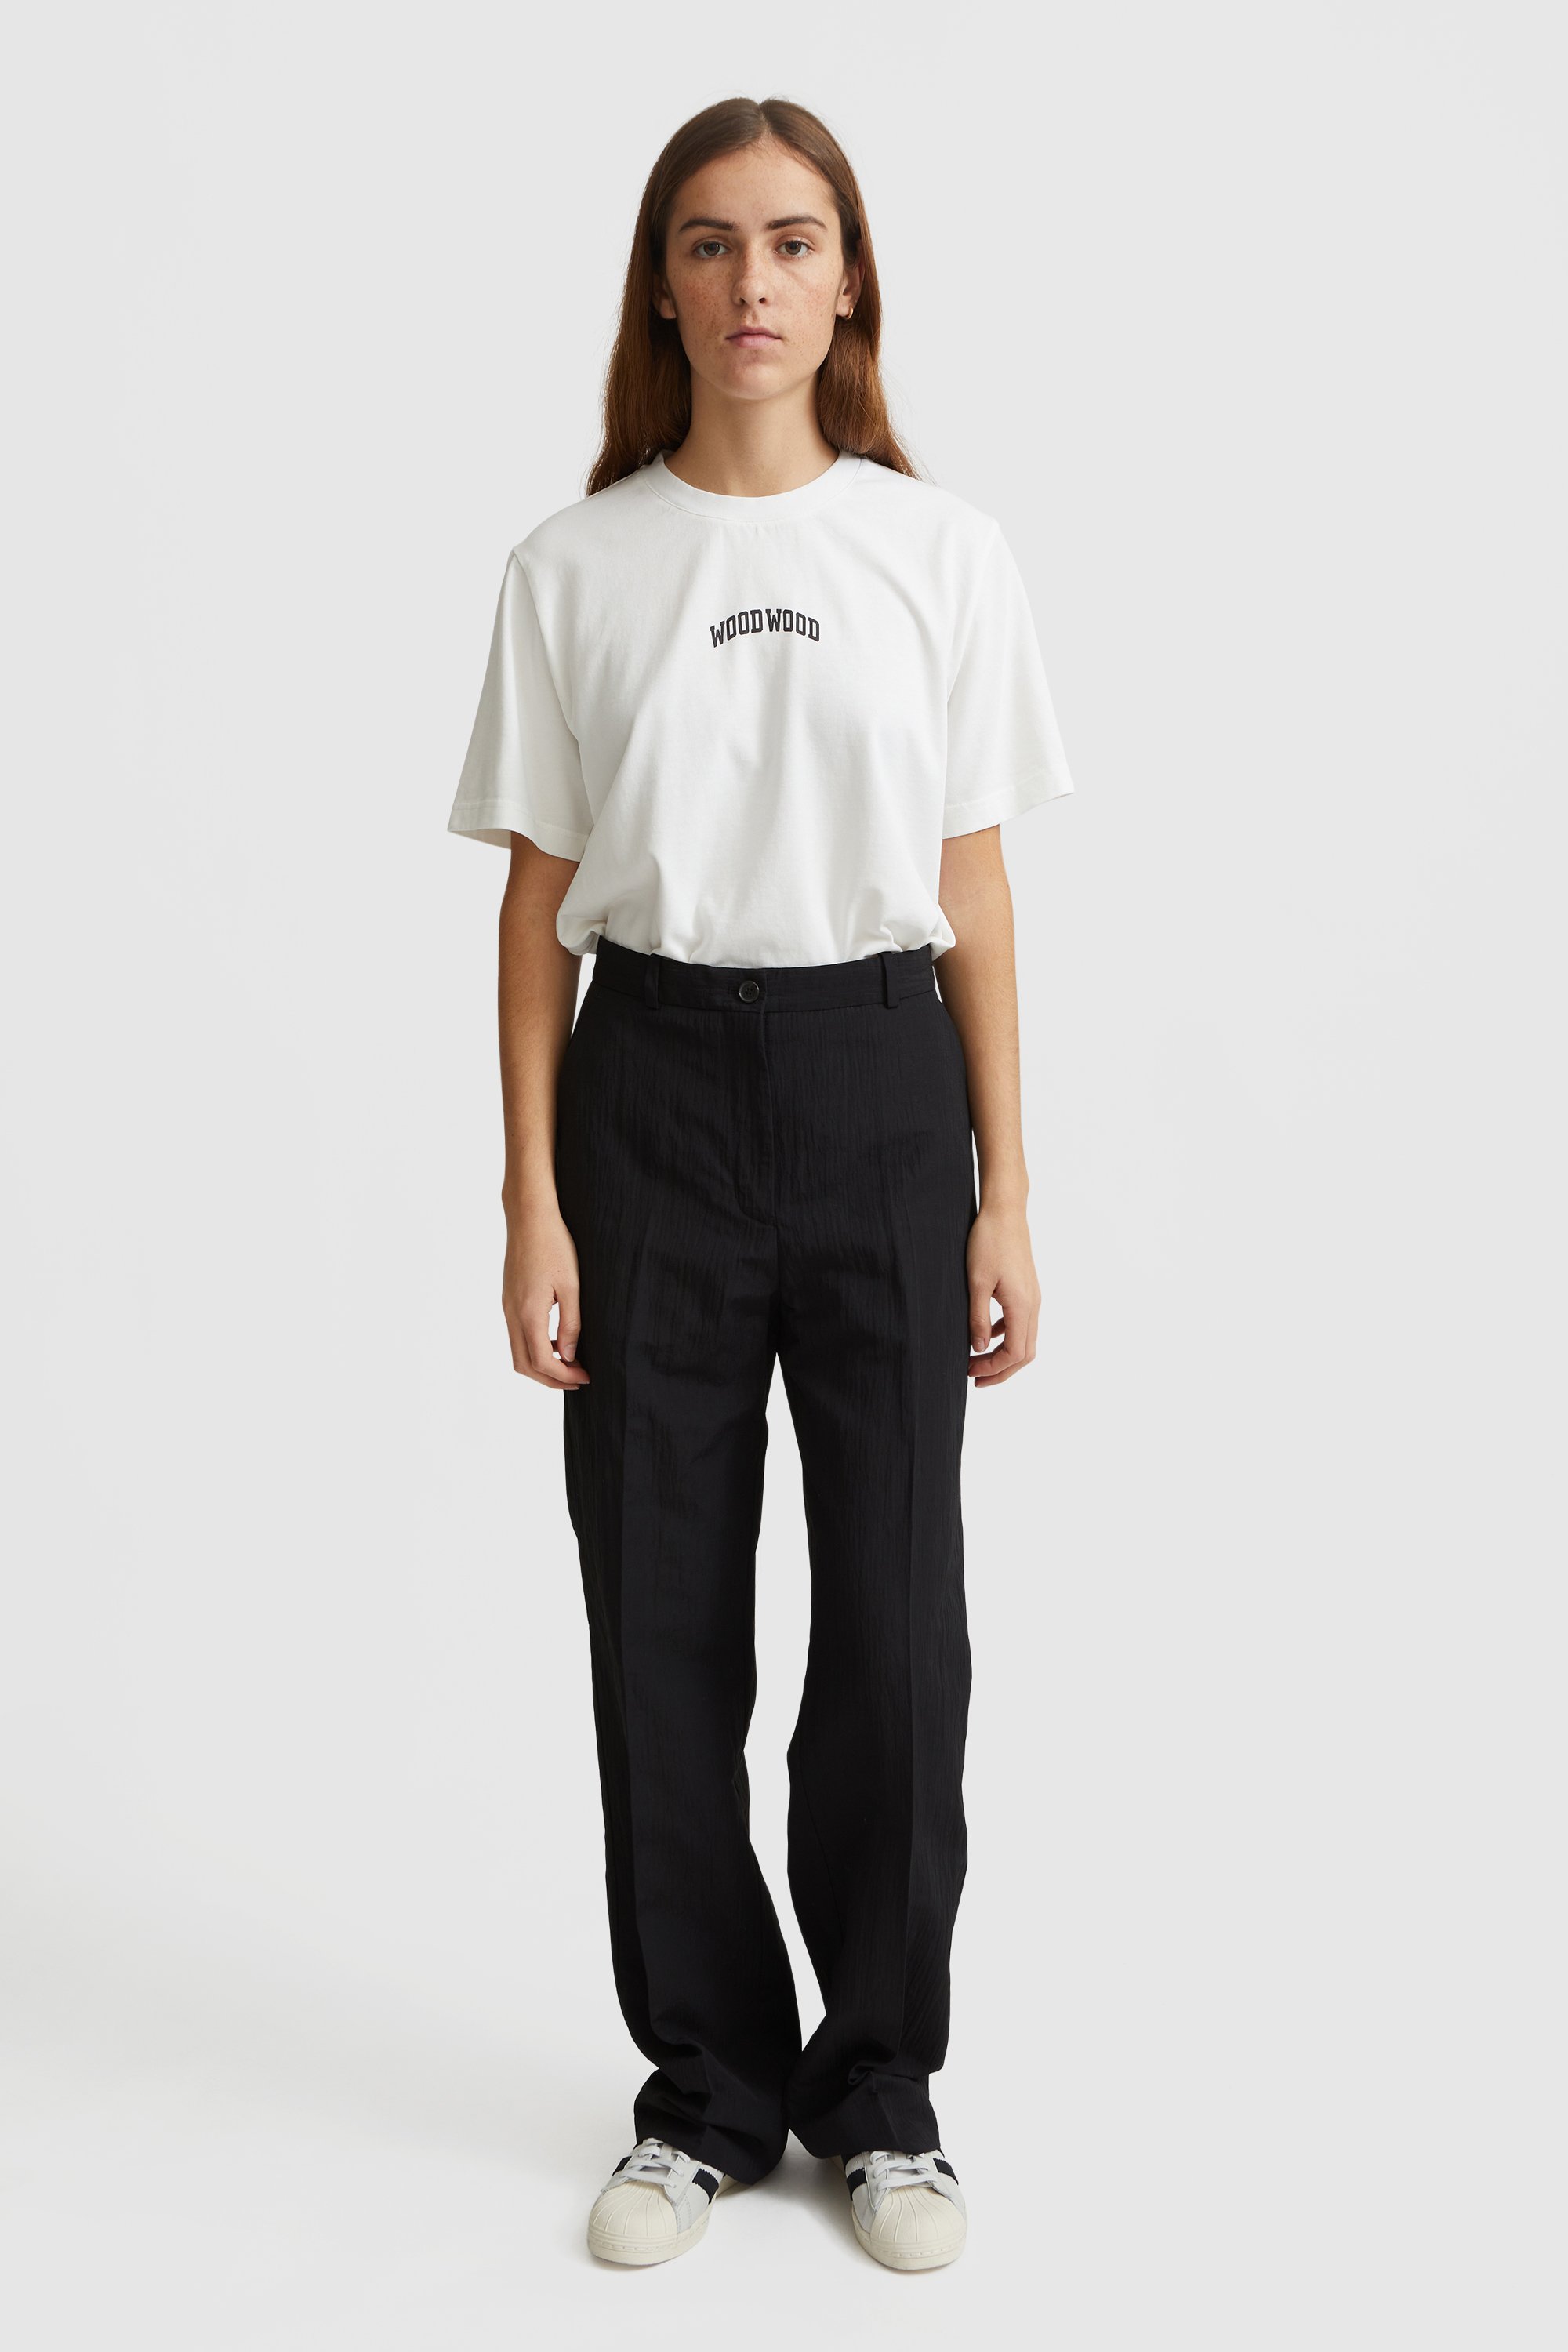 Wood Wood Evelyn structured trousers Black | WoodWood.com